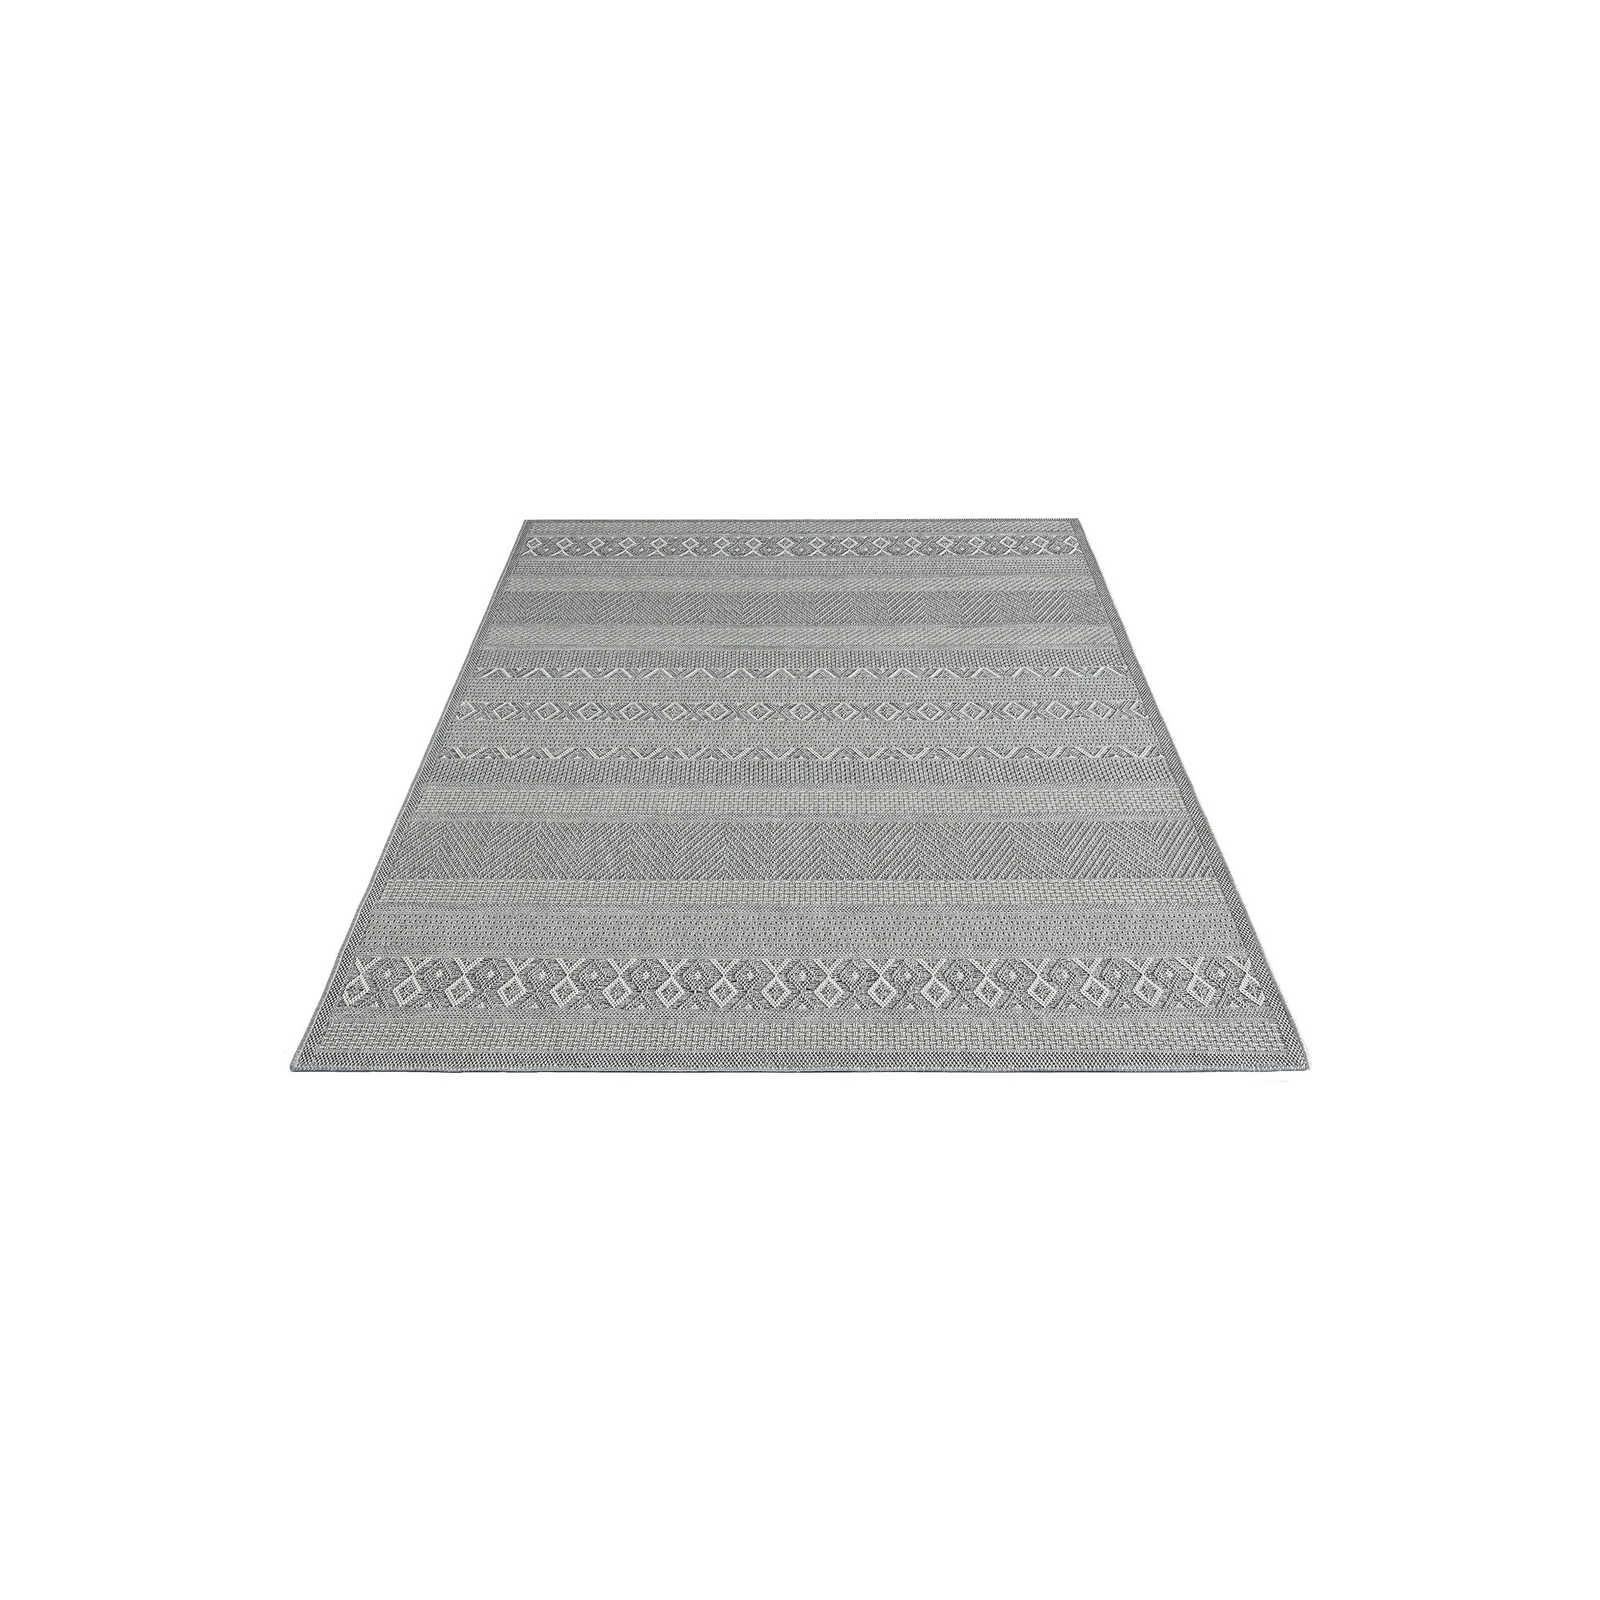 Simple Patterned Outdoor Rug in Grey - 150 x 80 cm
